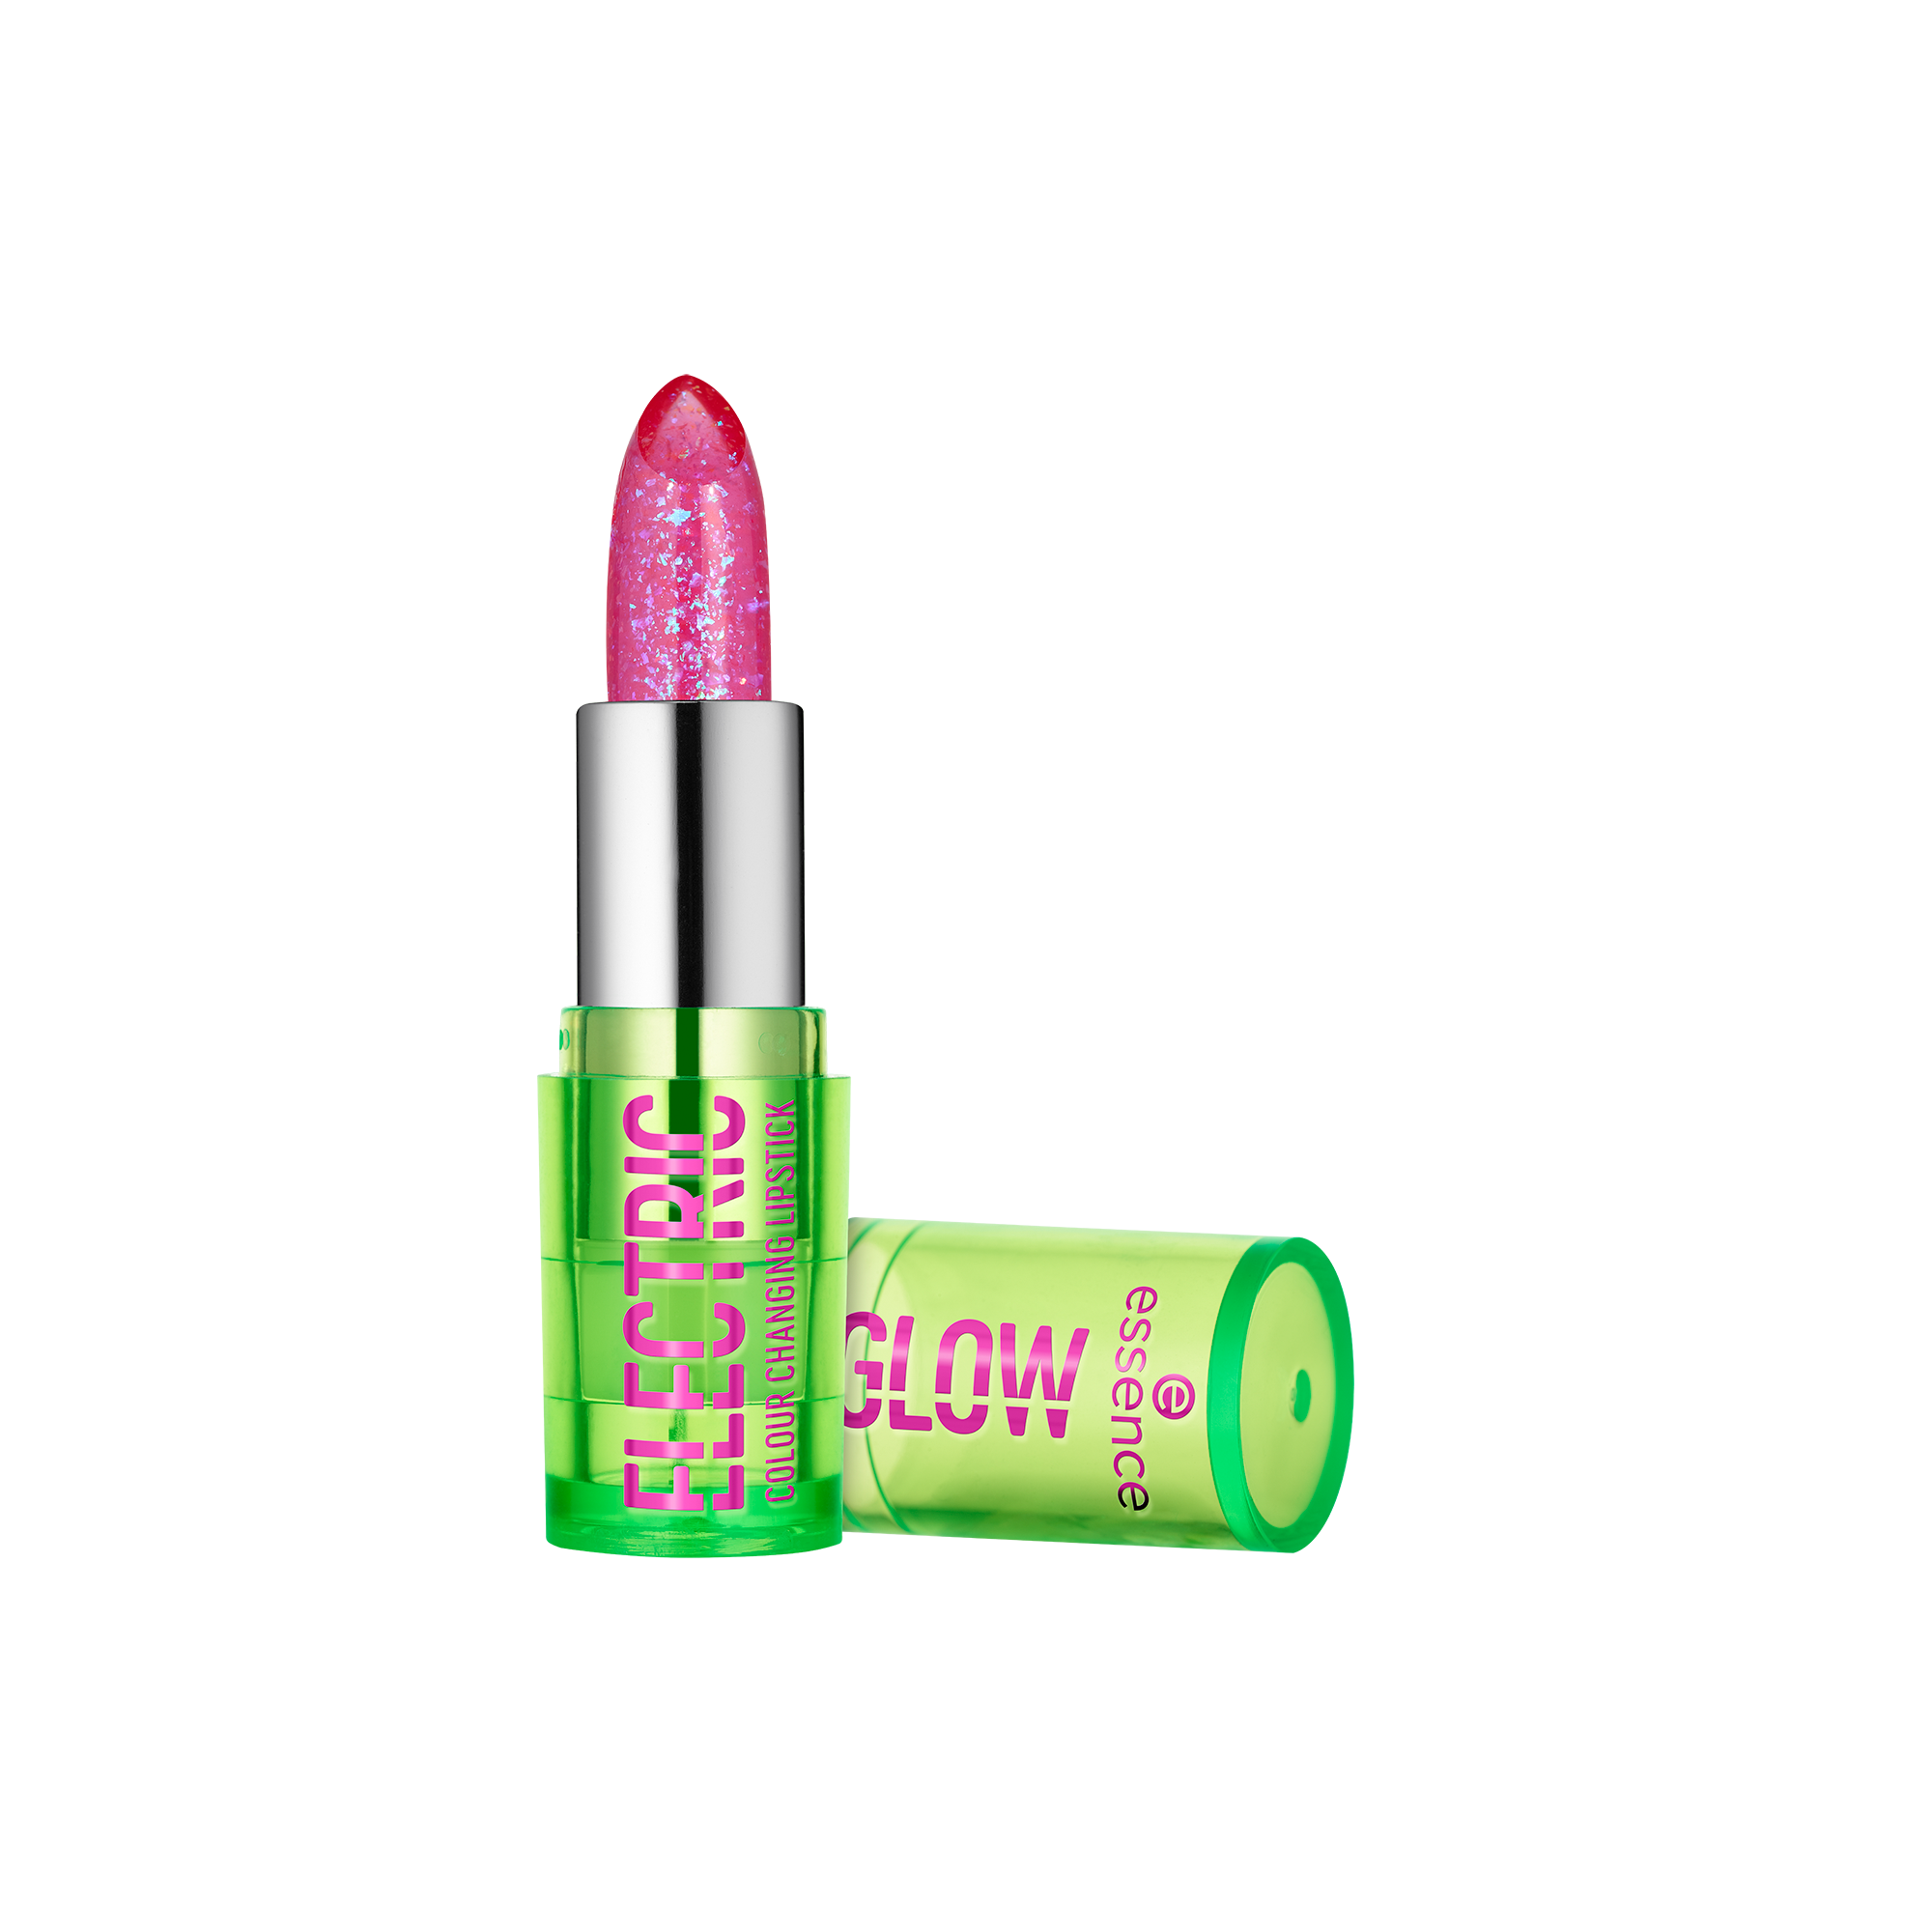 ELECTRIC GLOW colour changing lipstick